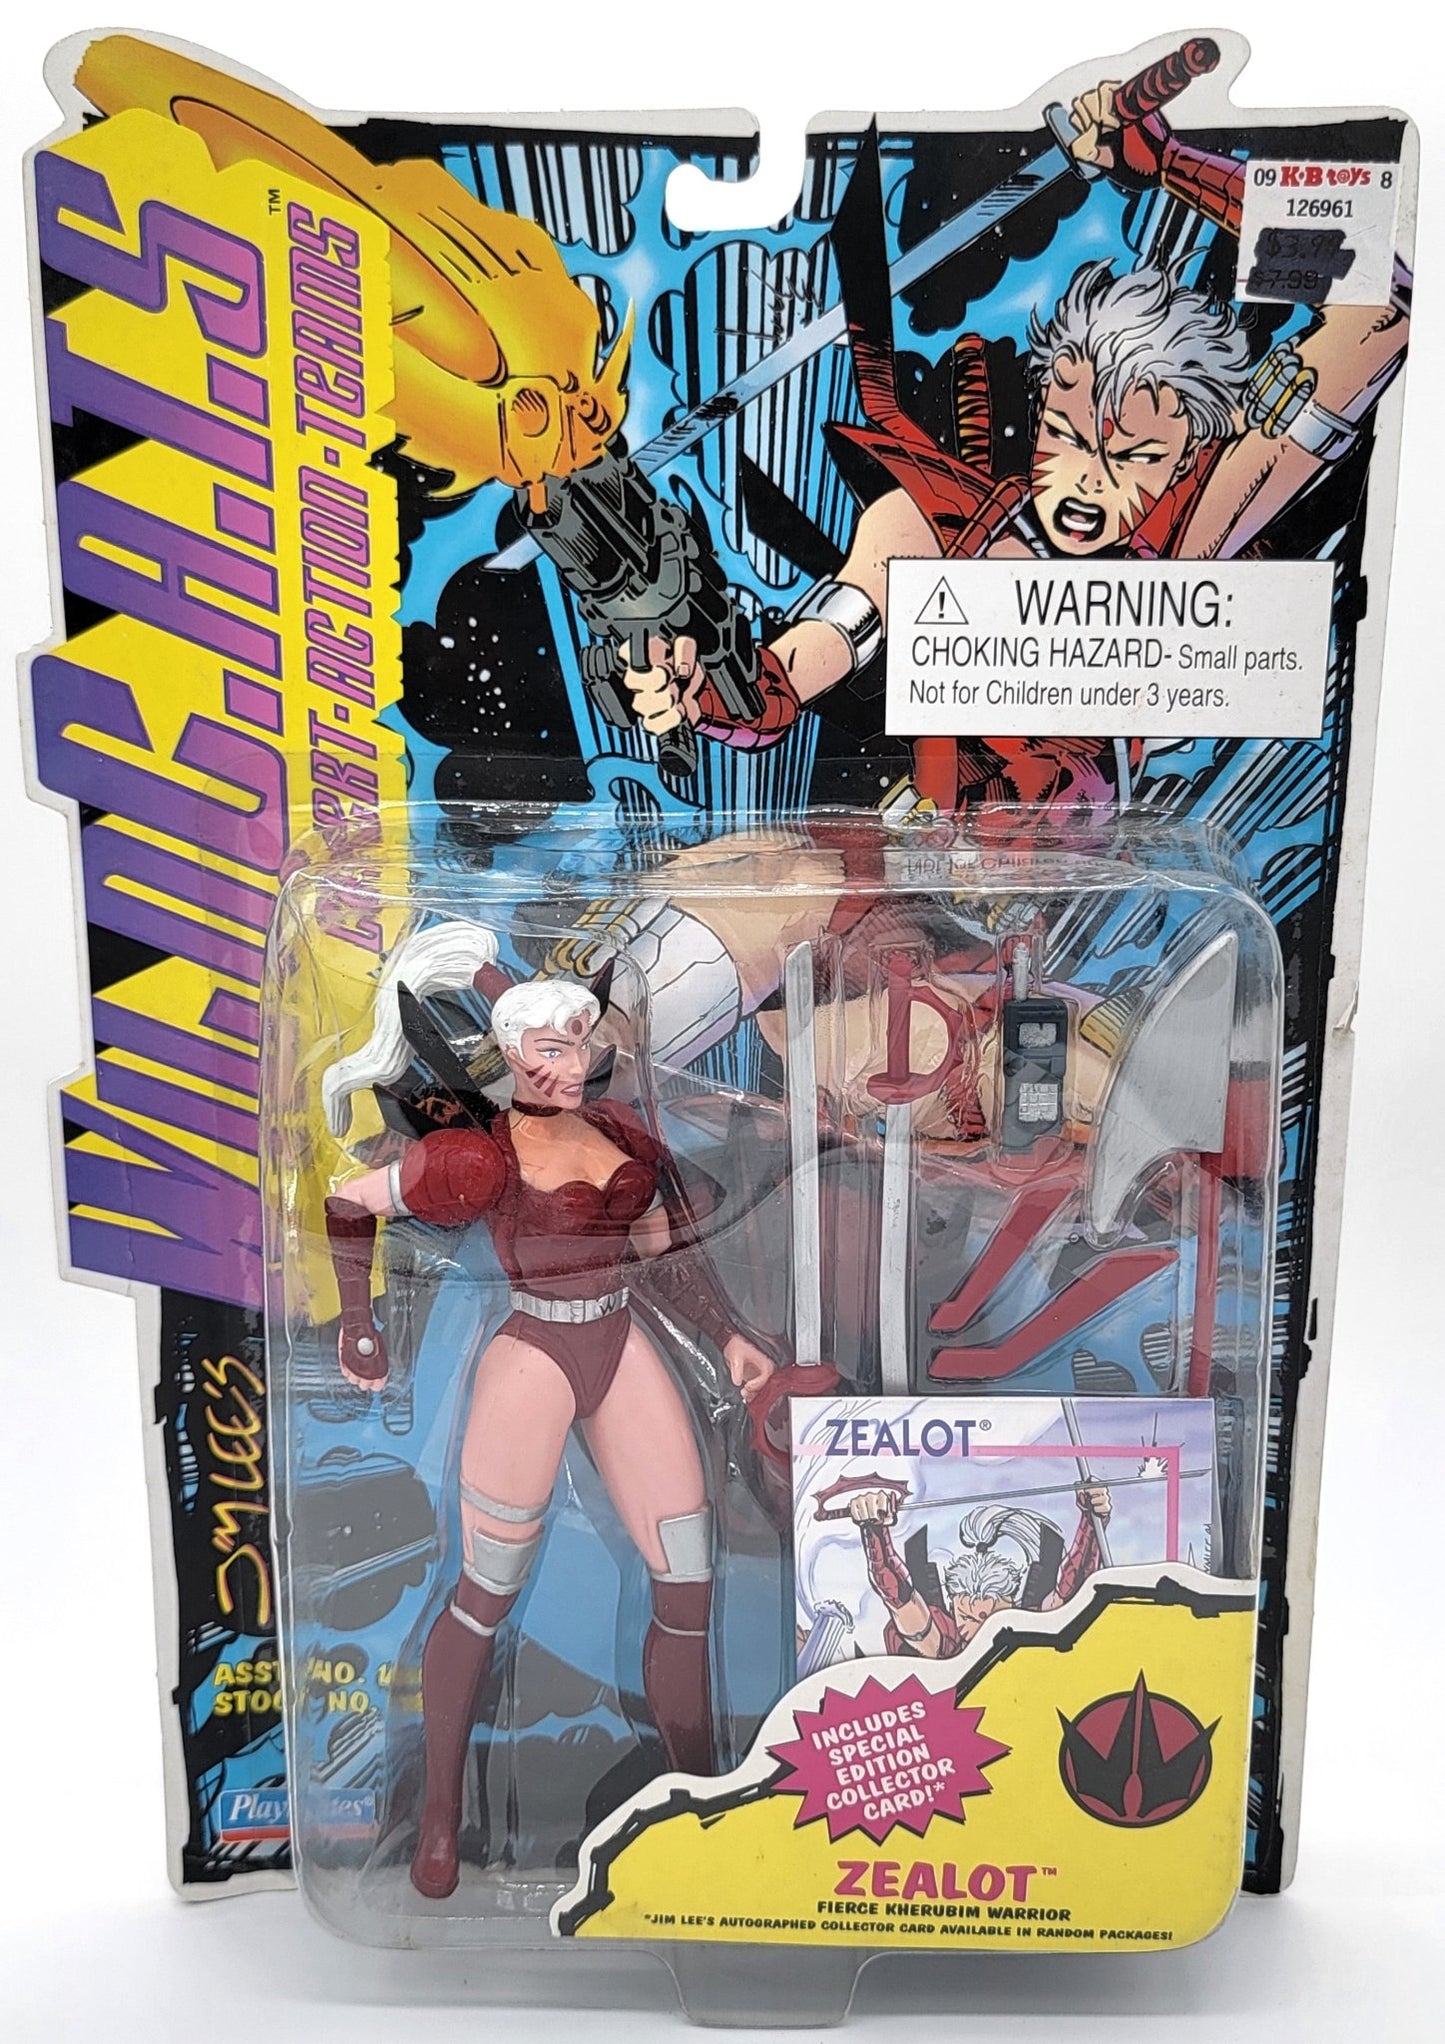 Playmates - Wildcats - Zealot | with Special Edition Collector Card | Vintage Playmates Action Figure - Action Figures - Steady Bunny Shop